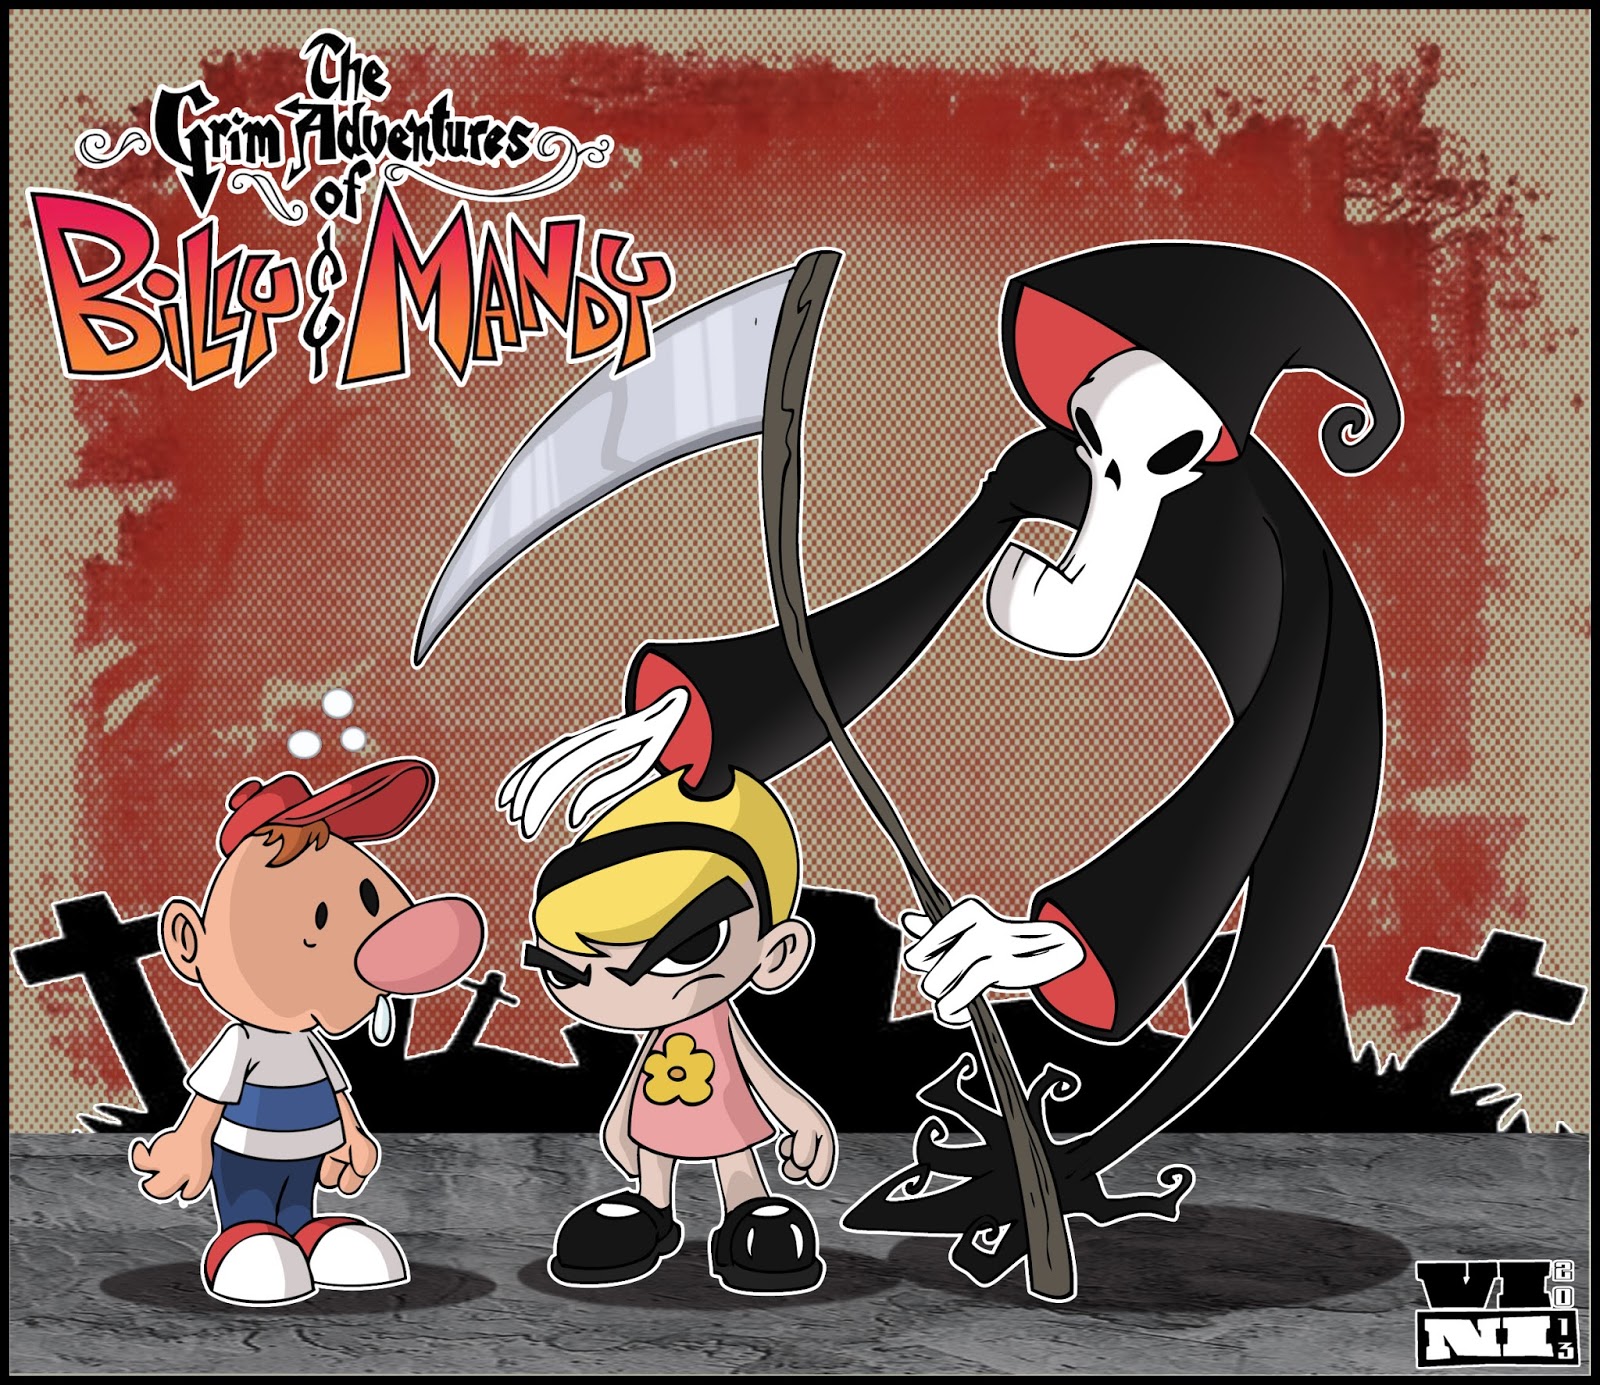 The Grim Adventures of Billy and Mandy). 